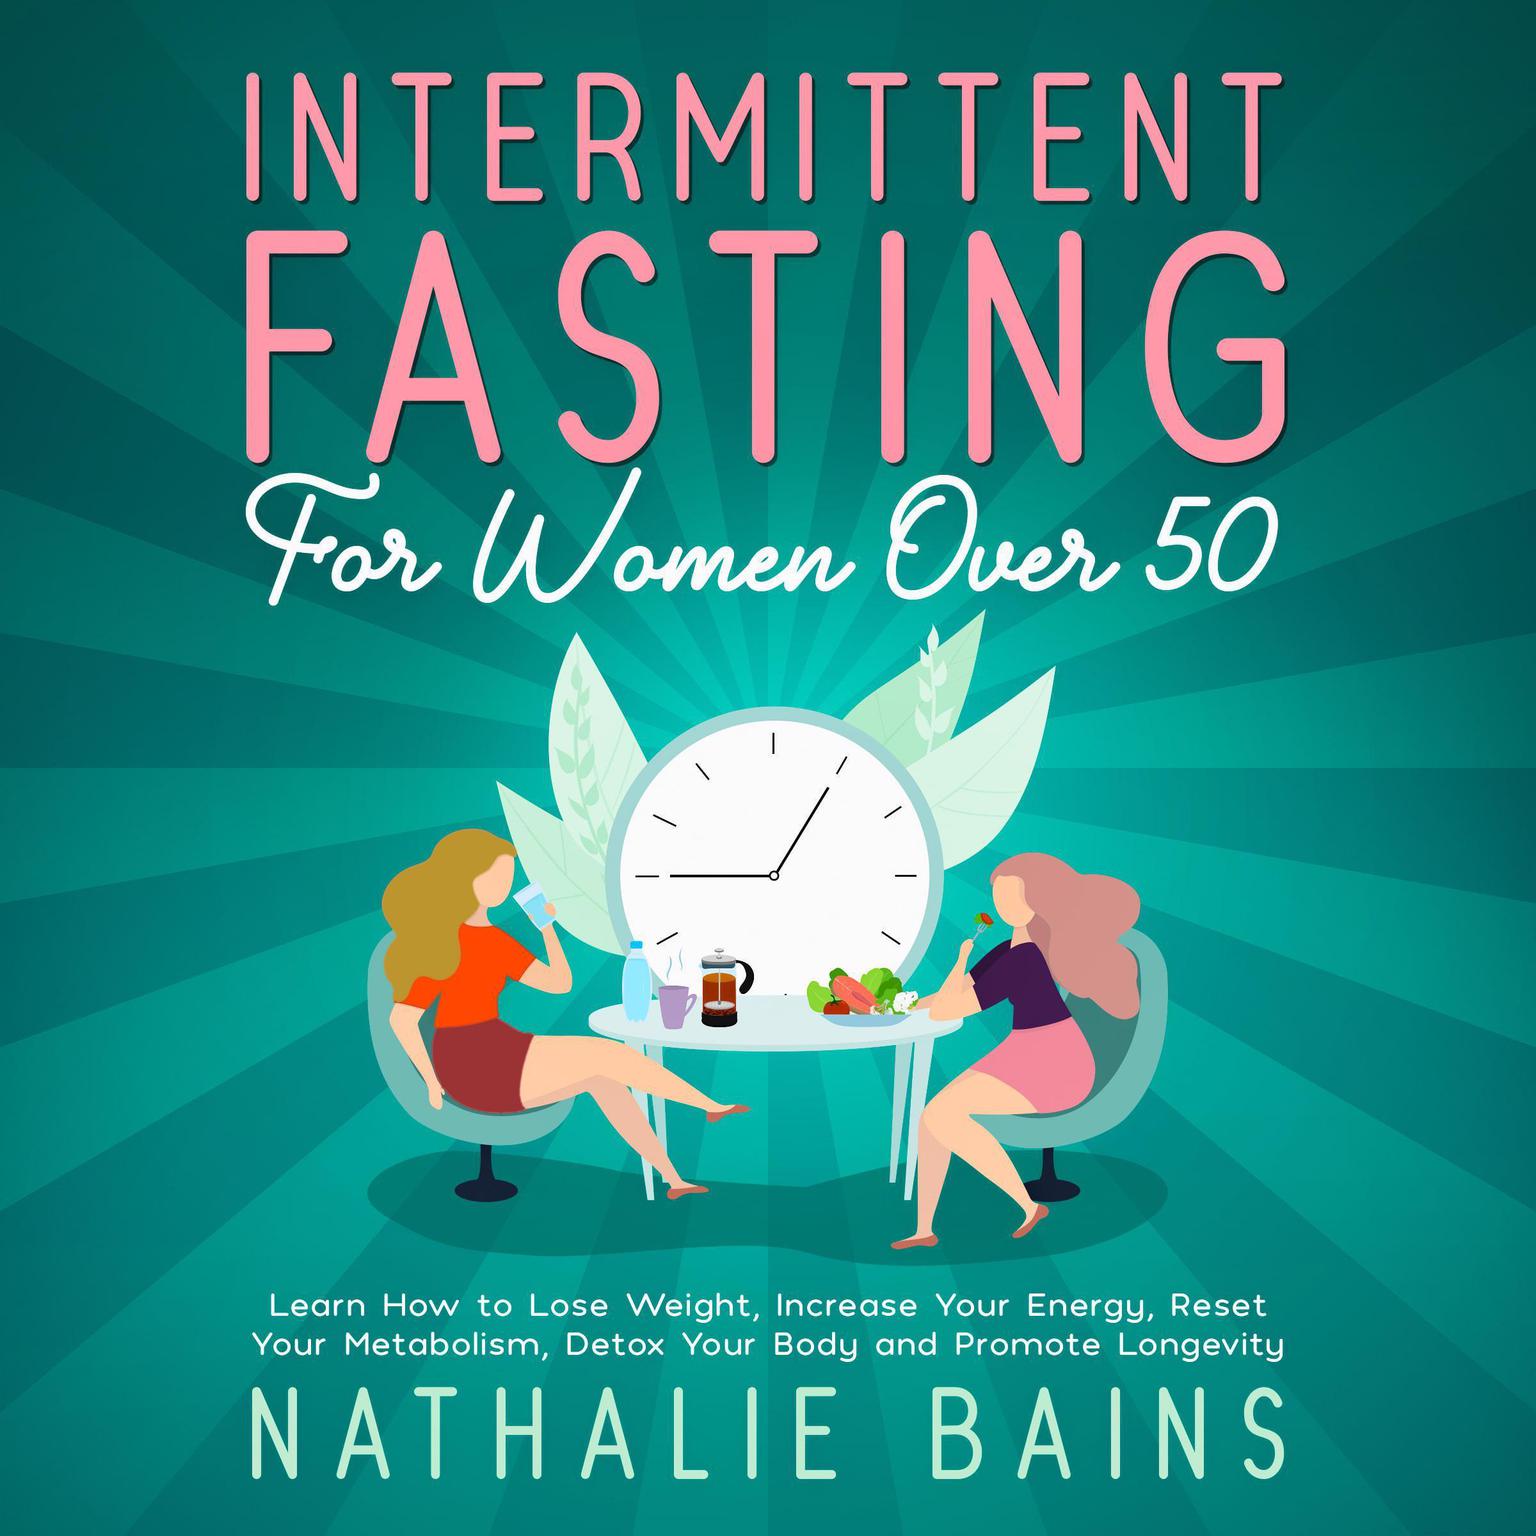 Intermittent Fasting for Women Over 50: Learn How to Lose Weight, Increase Your Energy, Reset Your Metabolism, Detox Your Body and Promote Longevity Audiobook, by Nathalie Bains